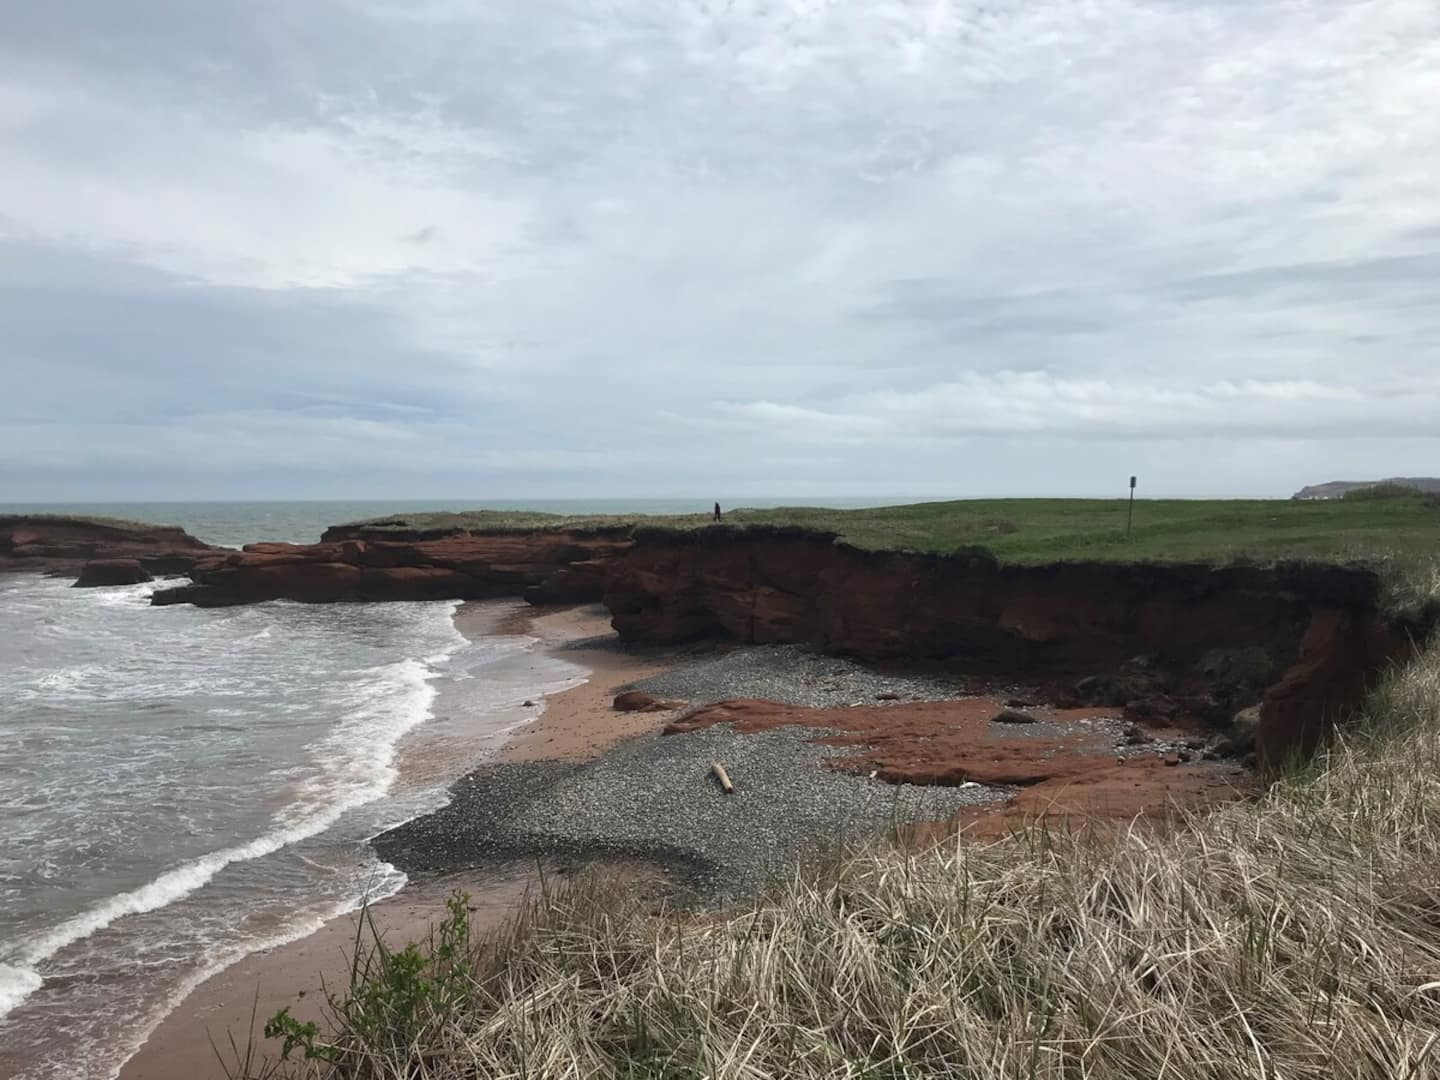 Erosion: the Magdalen Islands have lost more than 8 meters since 2005